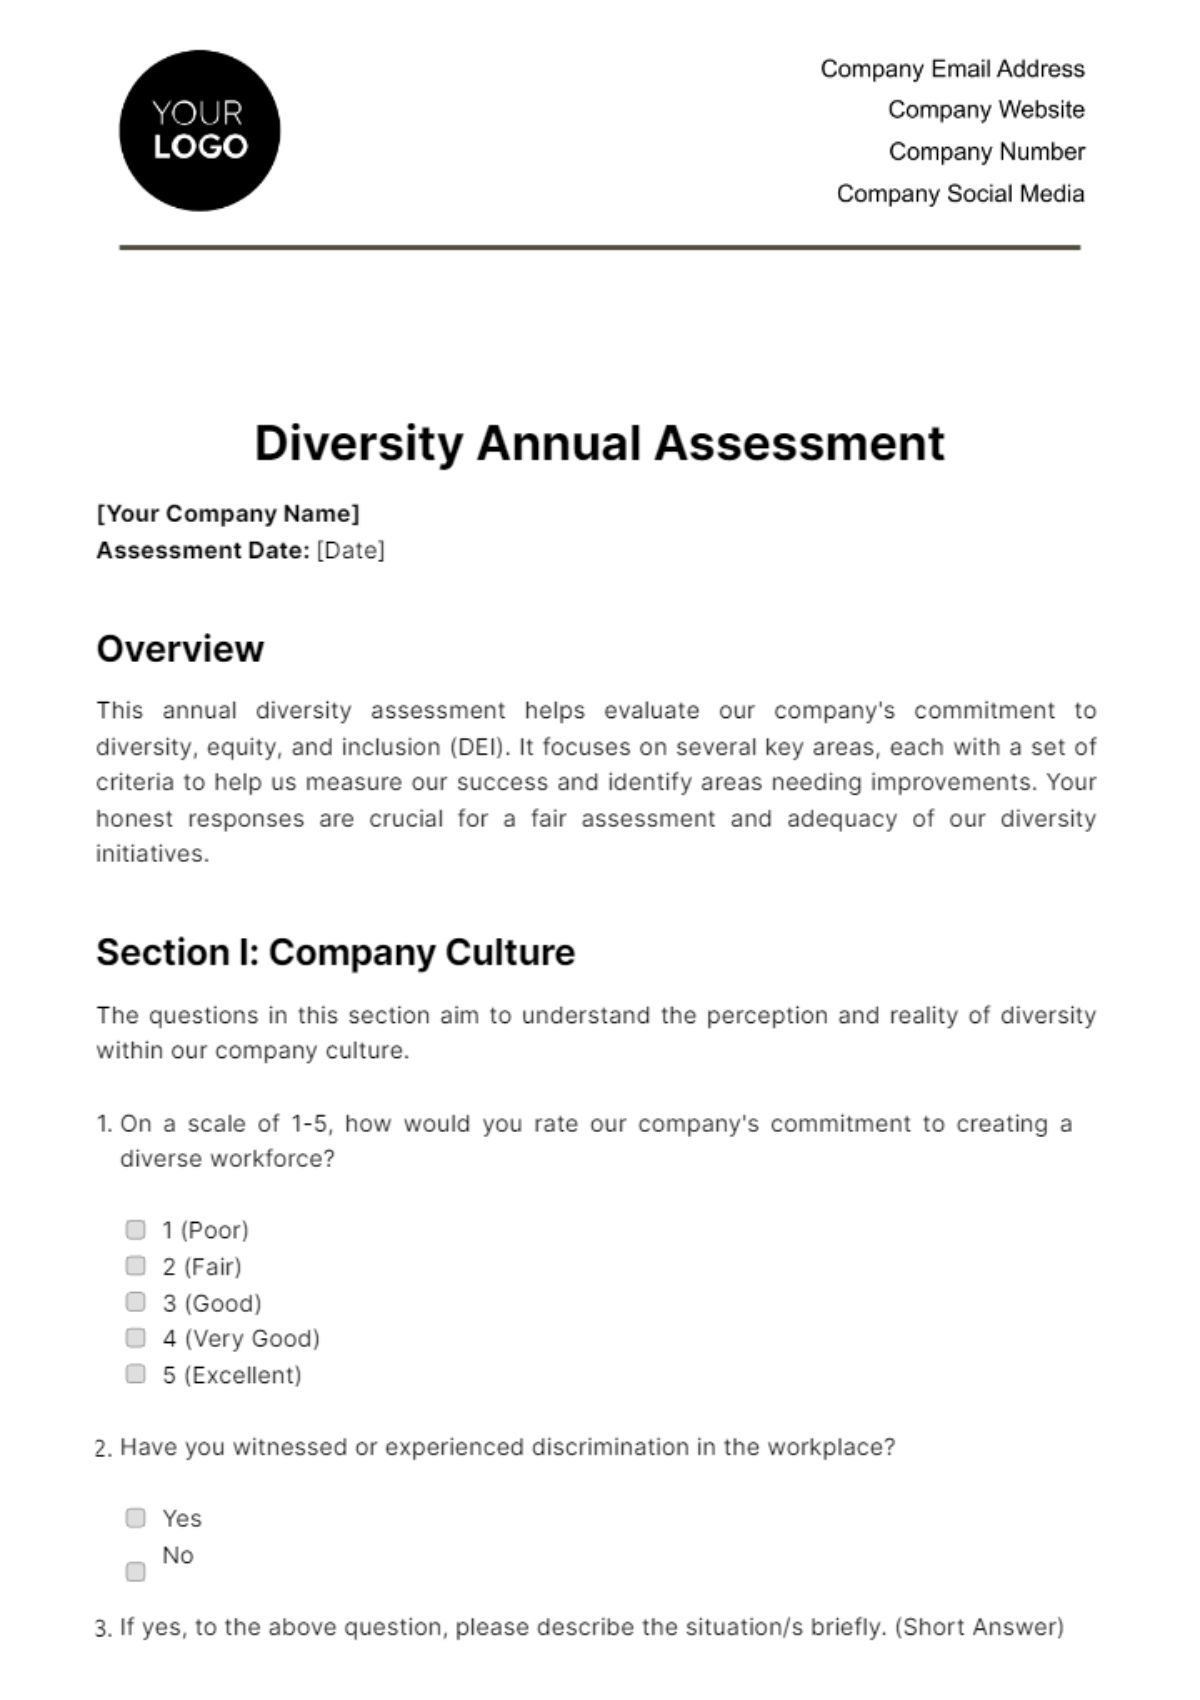 Free Diversity Annual Assessment HR Template